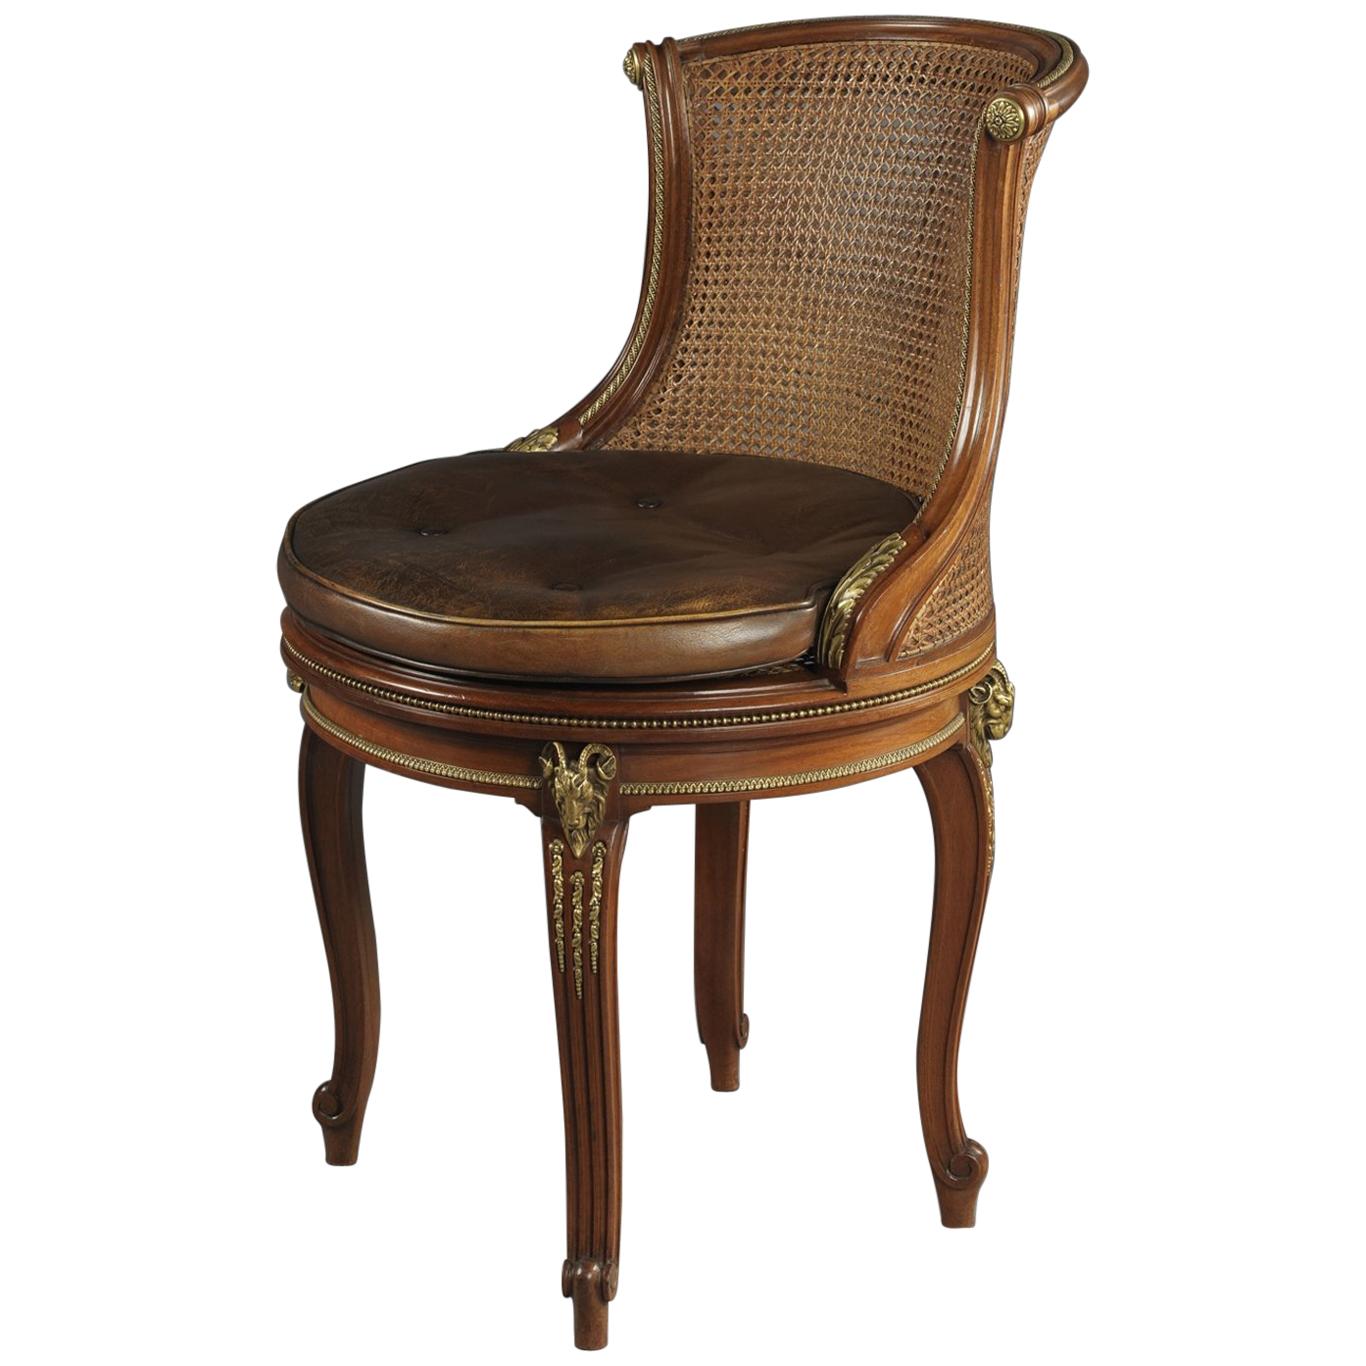 Gilt Bronze-Mounted Mahogany Desk Chair by François Linke, circa 1910 For Sale